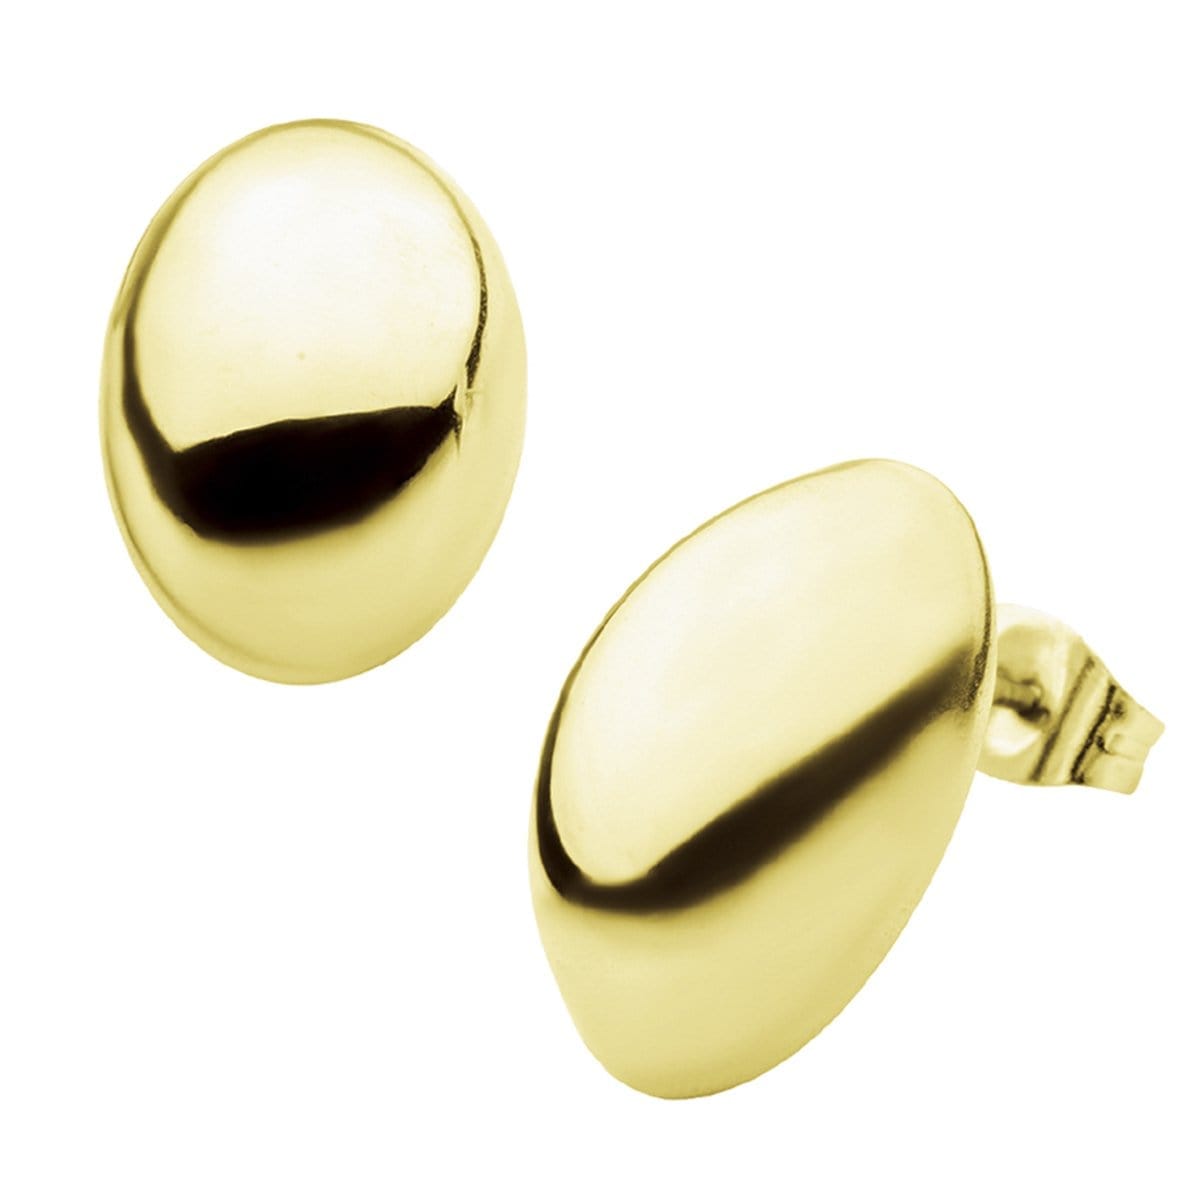 INOX JEWELRY Earrings Golden Tone Stainless Steel Large Oval Dome Studs SSE4813G